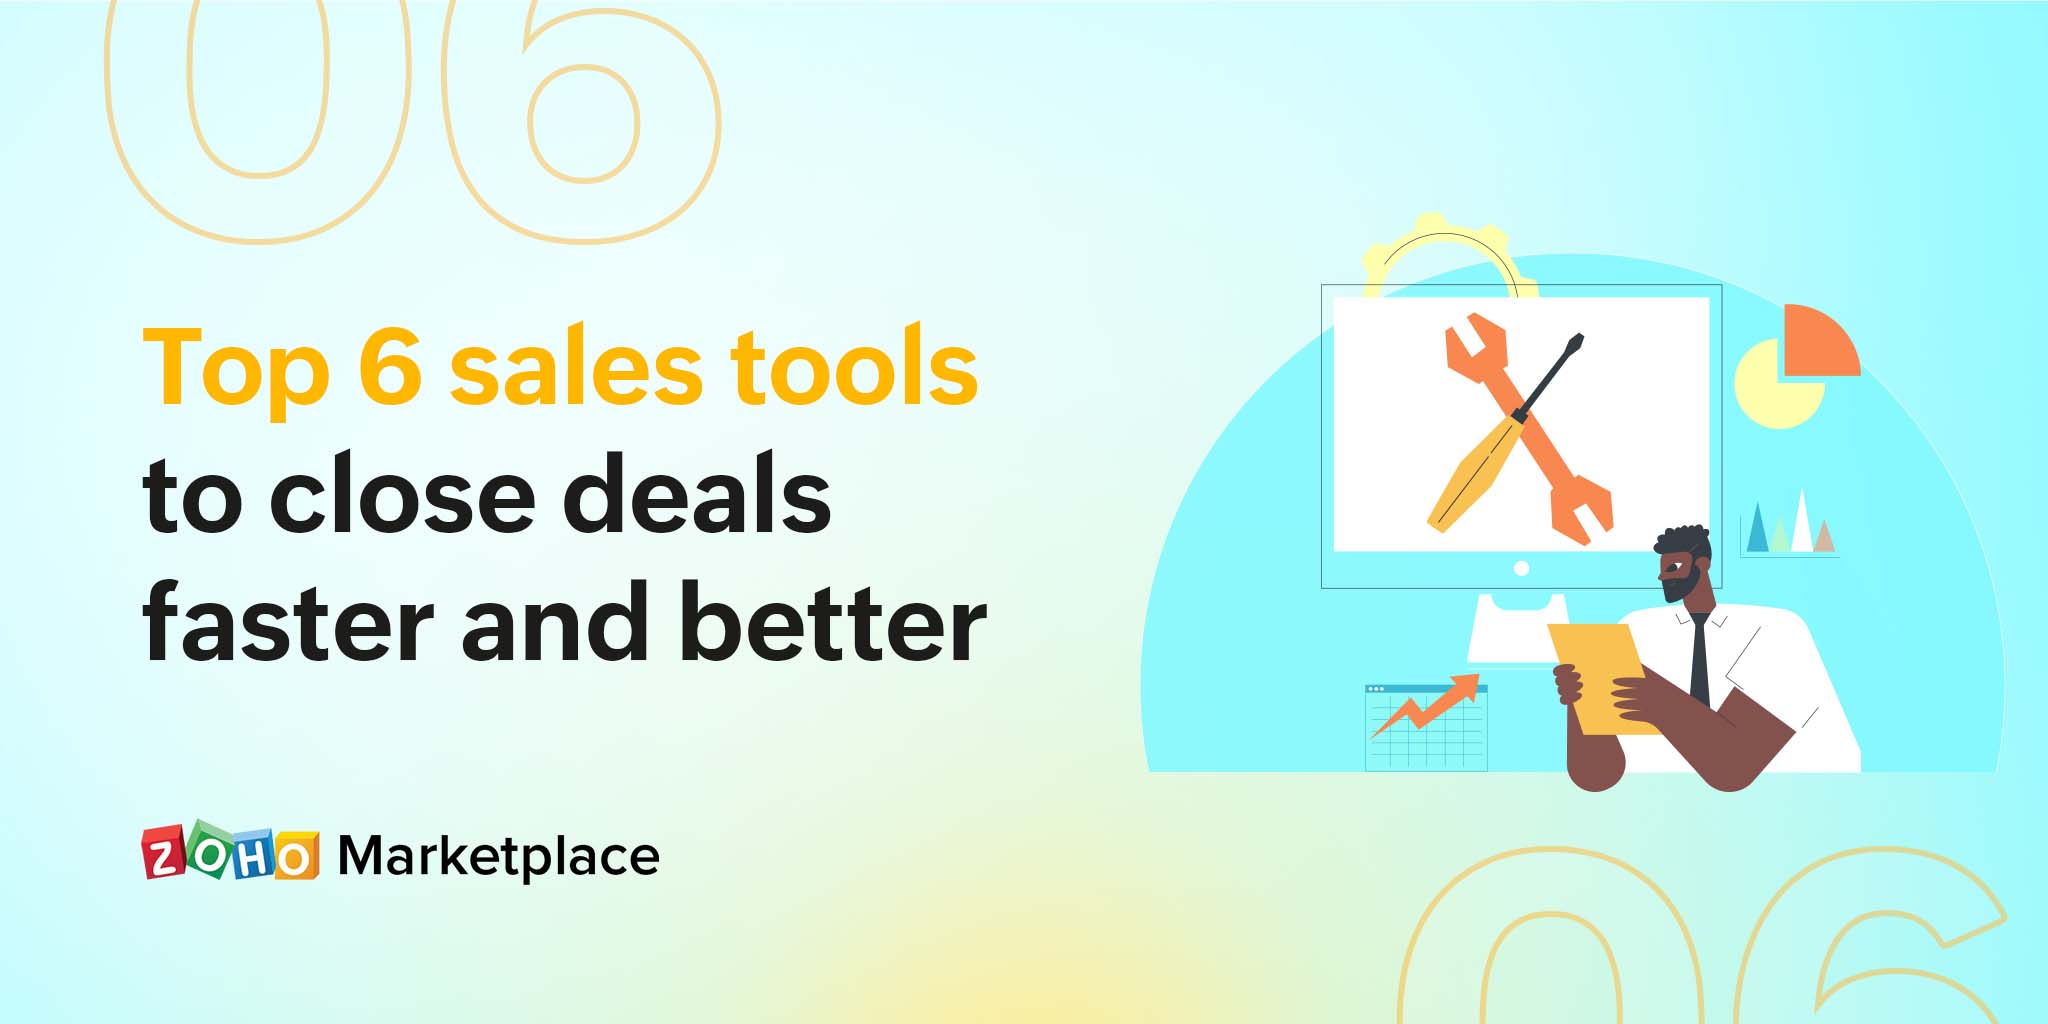 Sales series #2: Top 6 sales tools to close deals faster and better